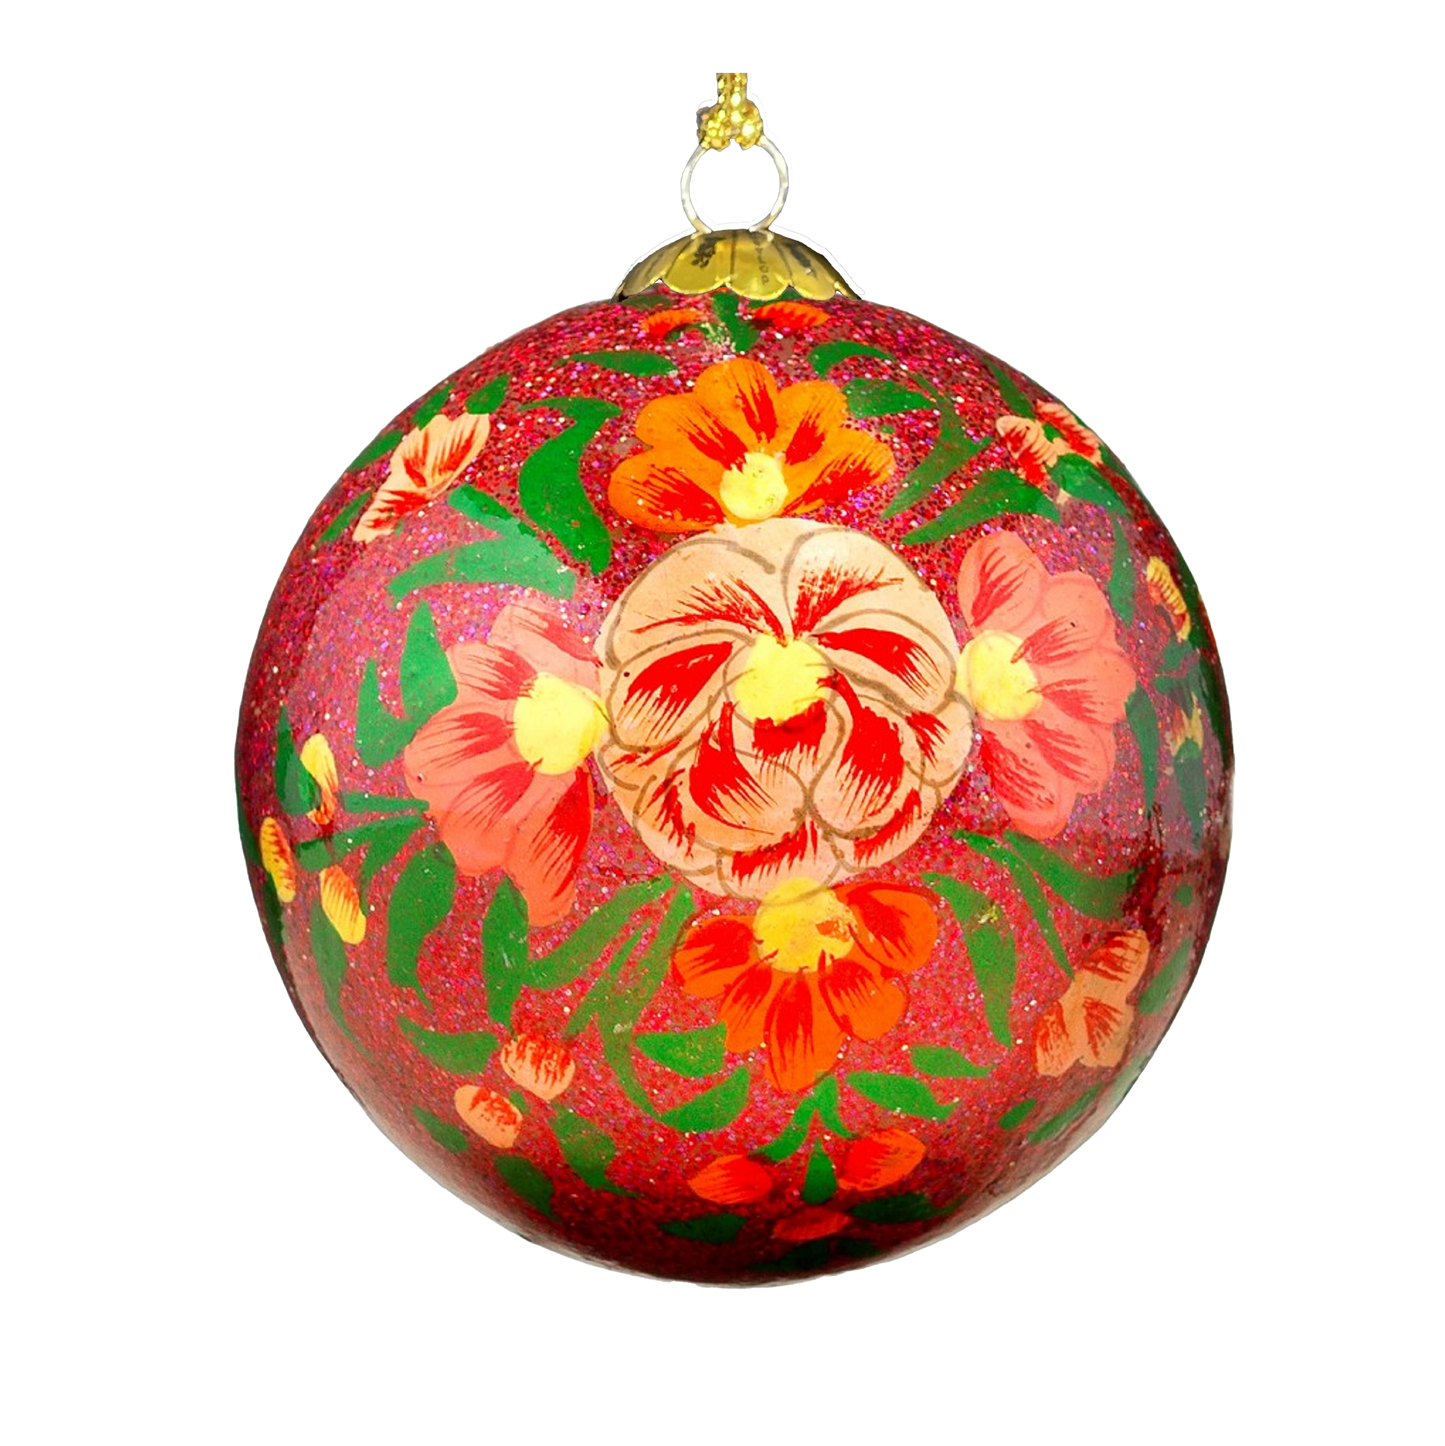 Alizeh Red Christmas Bauble for Christmas tree decorations